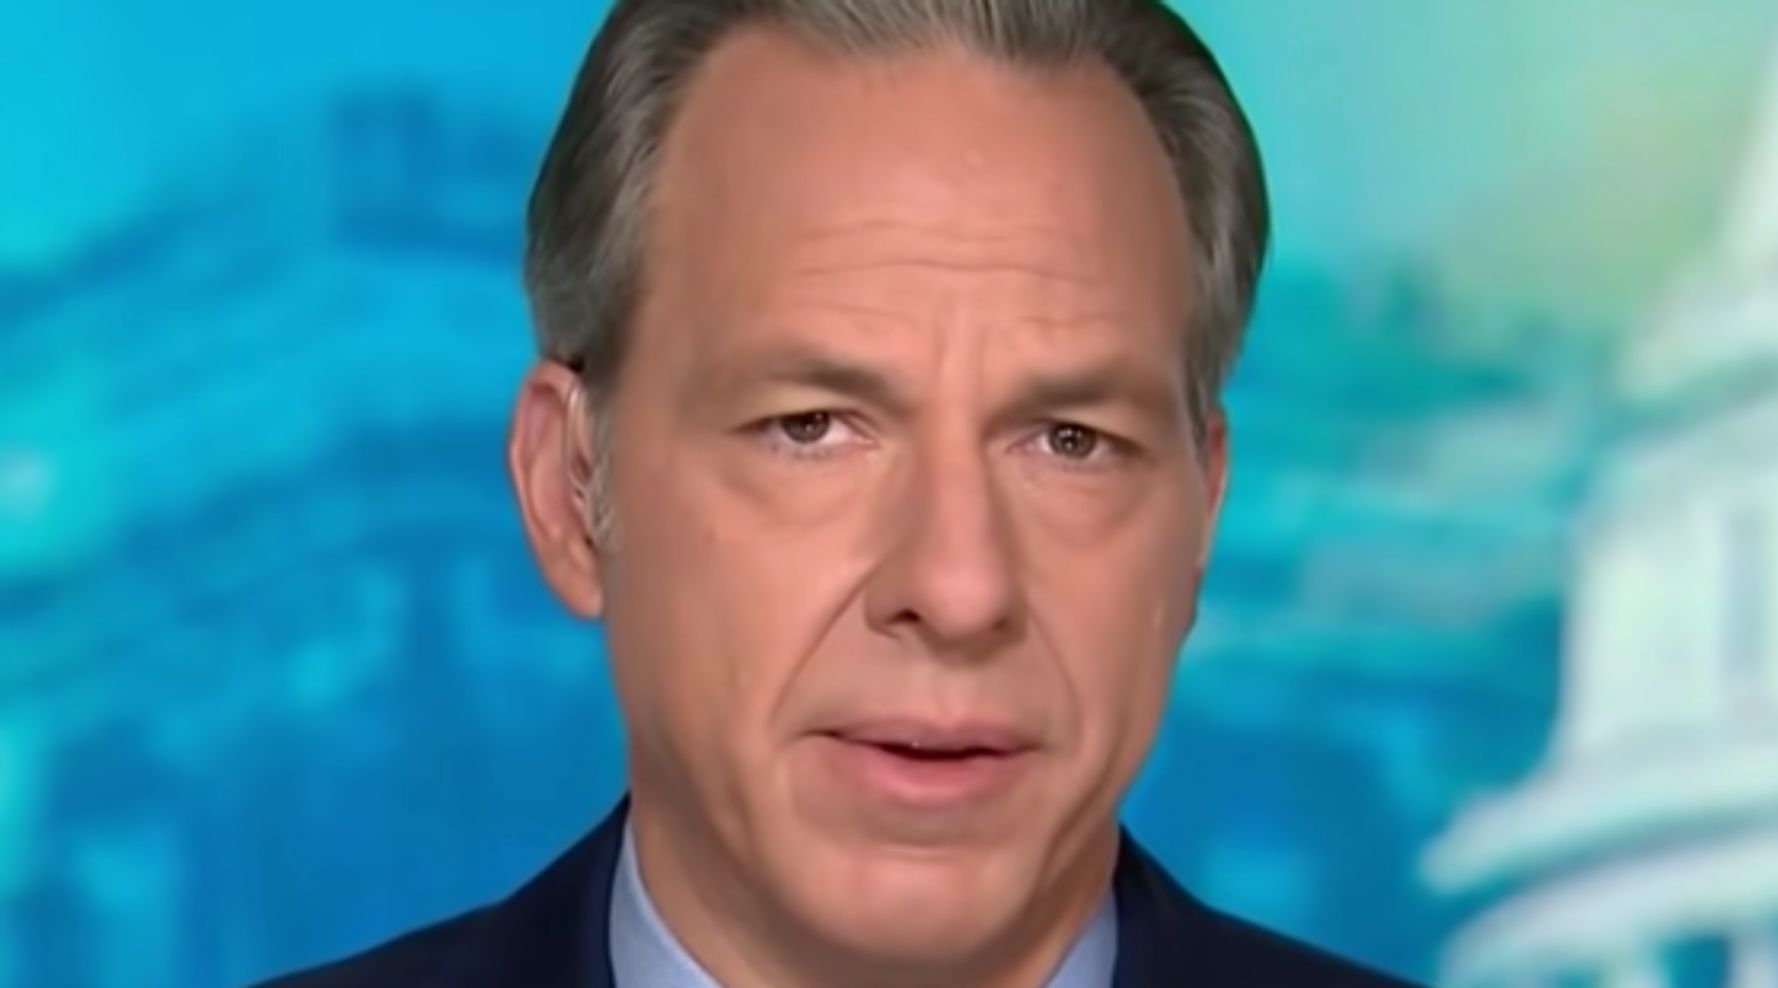 Jake Tapper Issues Stark Warning About What To Expect From Donald Trump In Next 11 Days